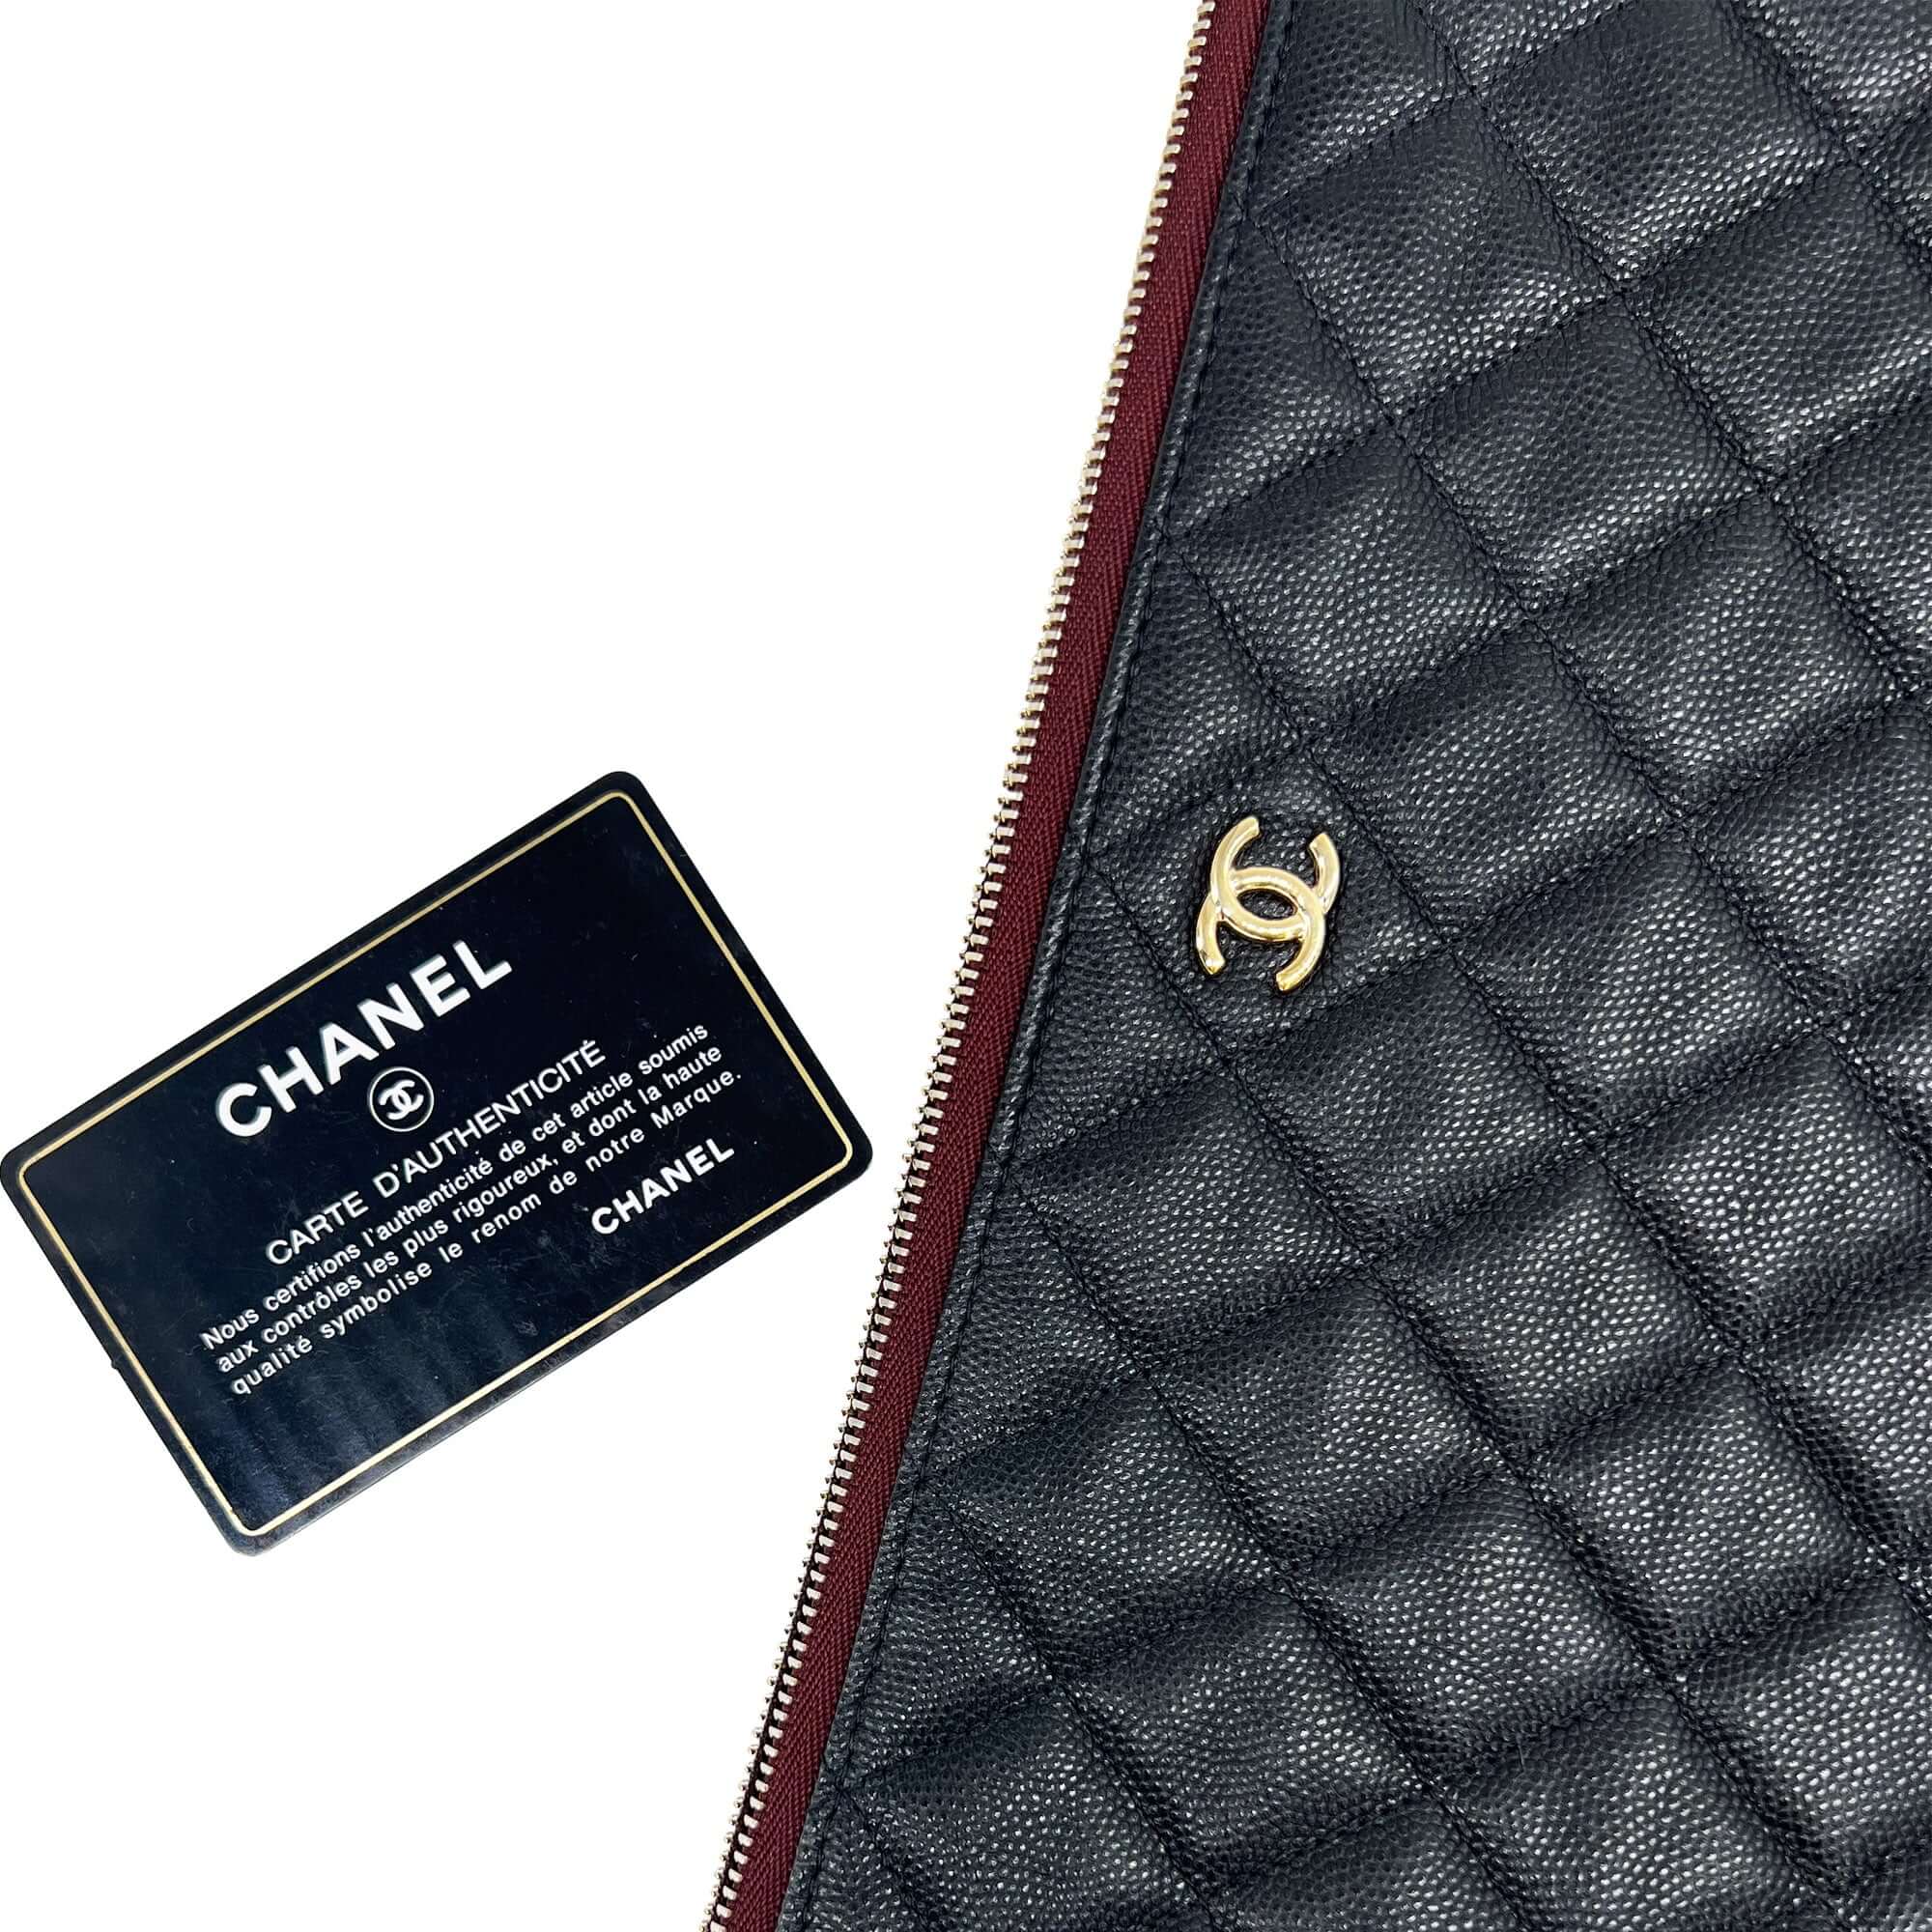 Chanel black quilted caviar leather large bag